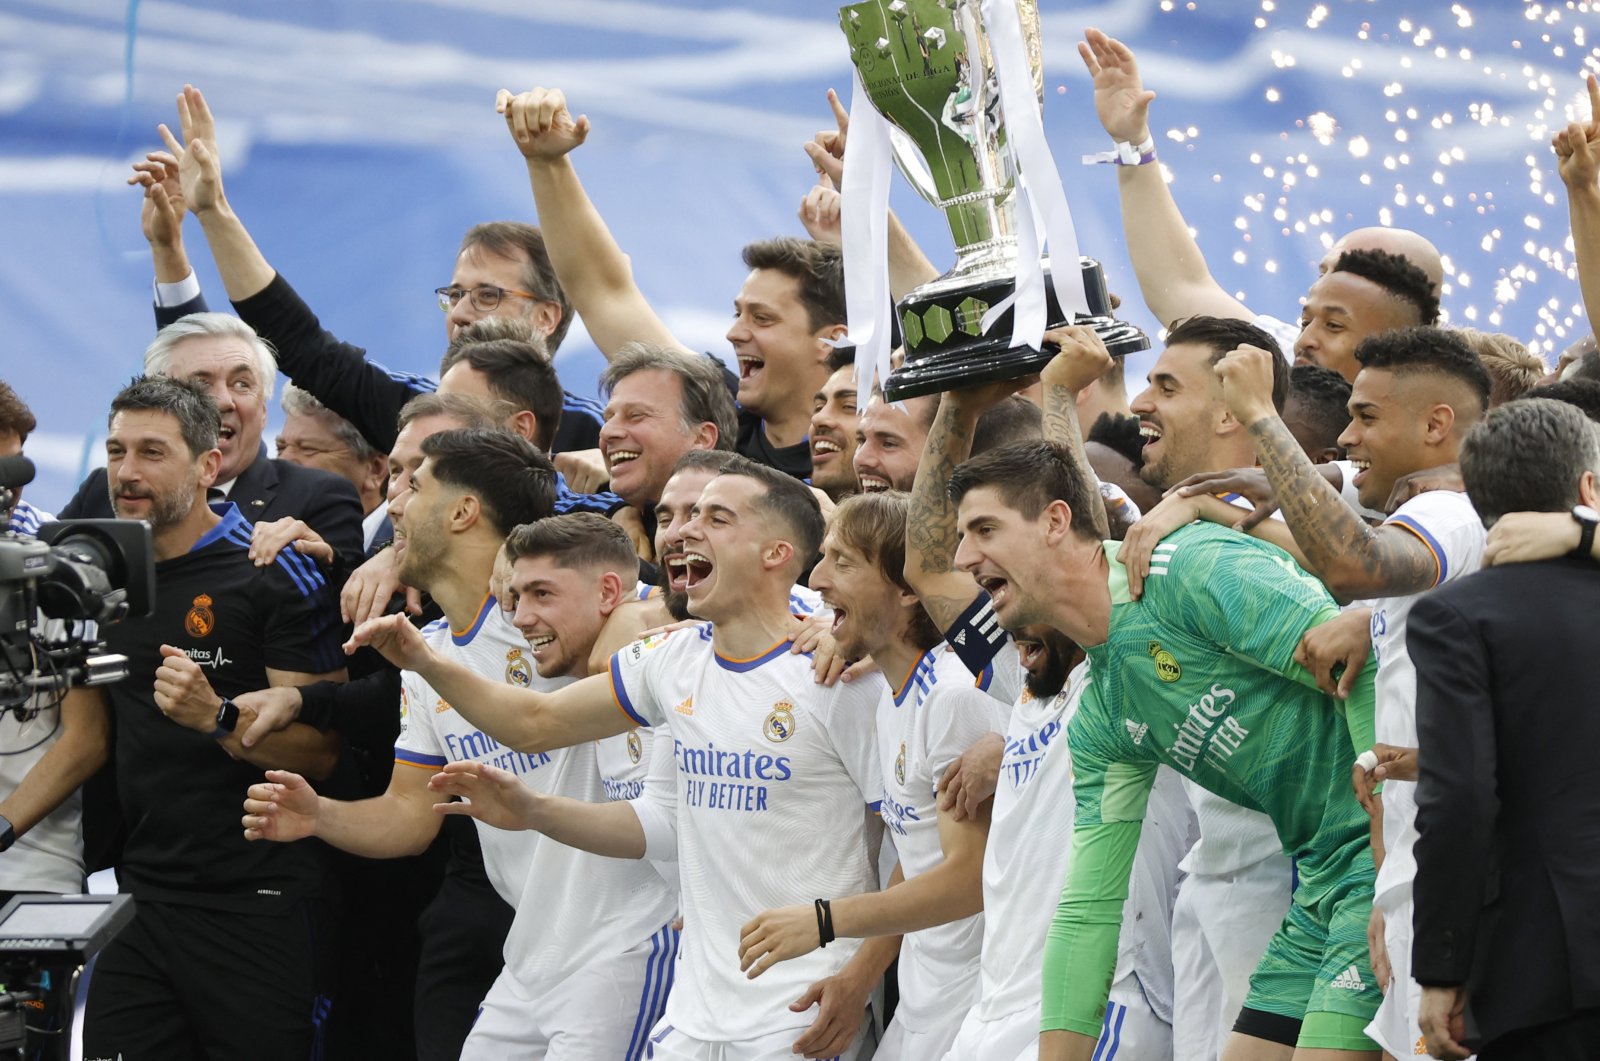 Real Madrid&#039;s Marcelo holds the trophy and celebrates with team members after winning the La Liga title at their home ground, Santiago Bernabeu Stadium in Madrid, Spain, April 30, 2022. (Reuters Photo)